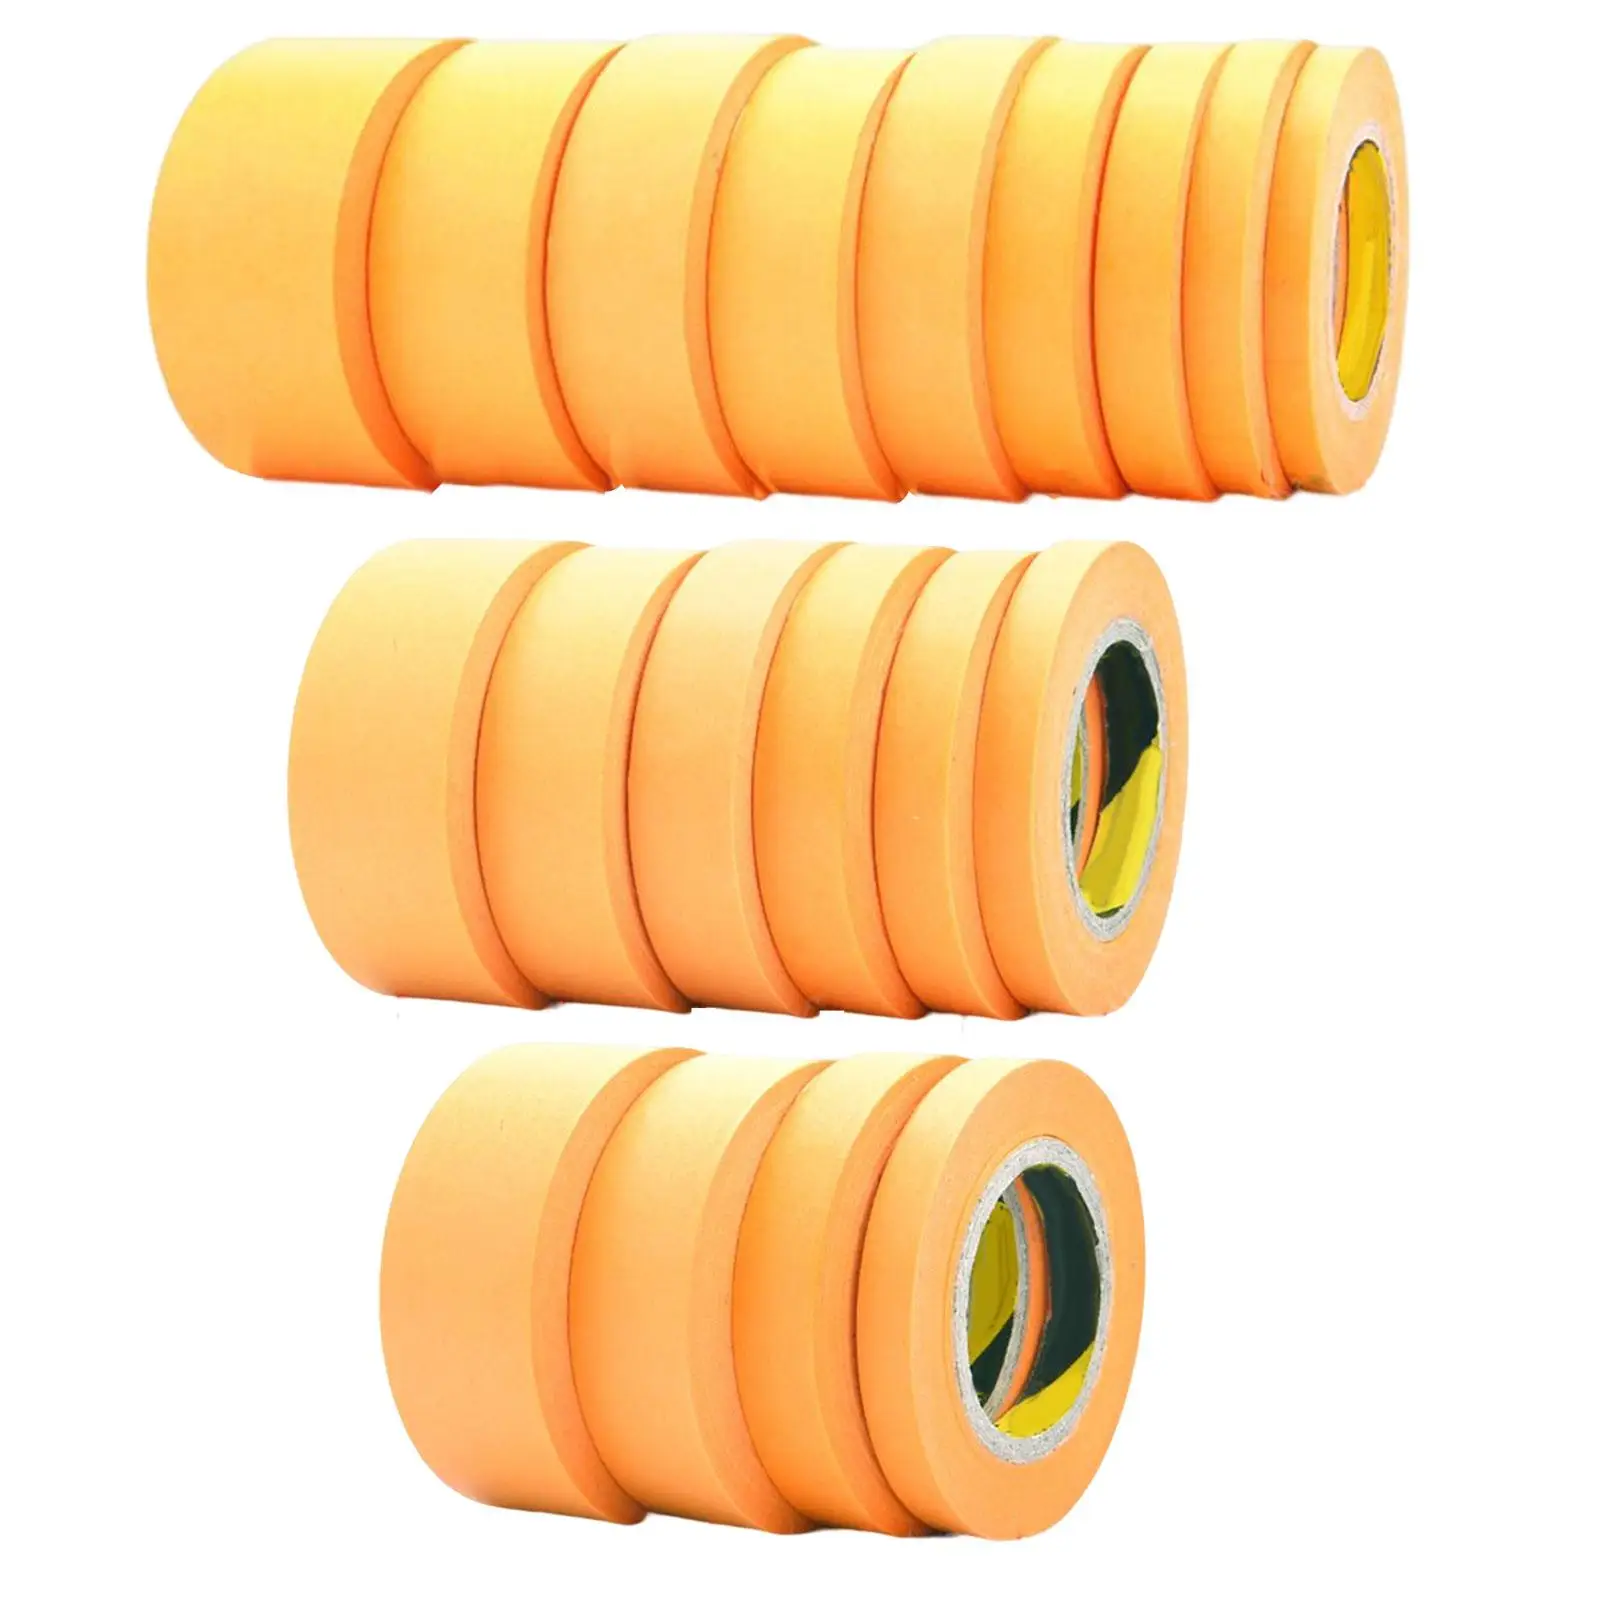 Pinstripe Tape Spray Coloring Painting Tape Automotive Masking Tape Masking Tape for Model Painting